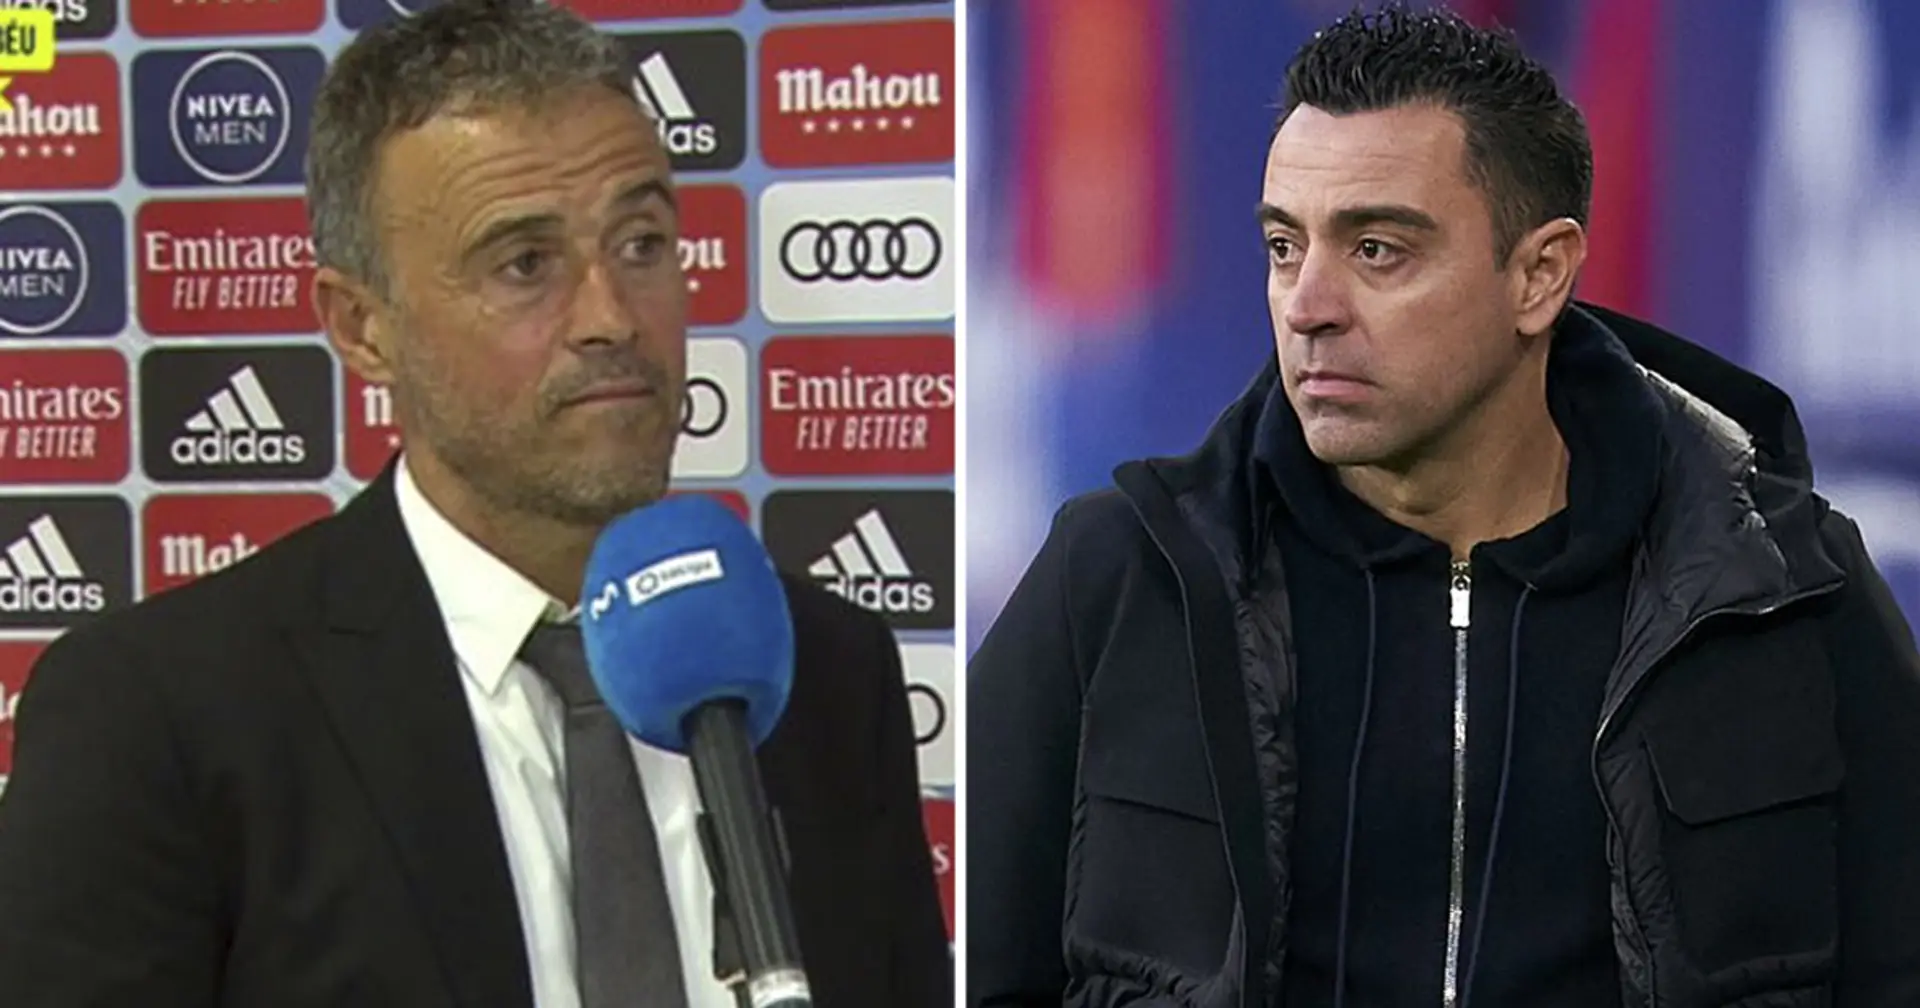 'Not what the fans would want': Luis Enrique opens up on Xavi's Barca